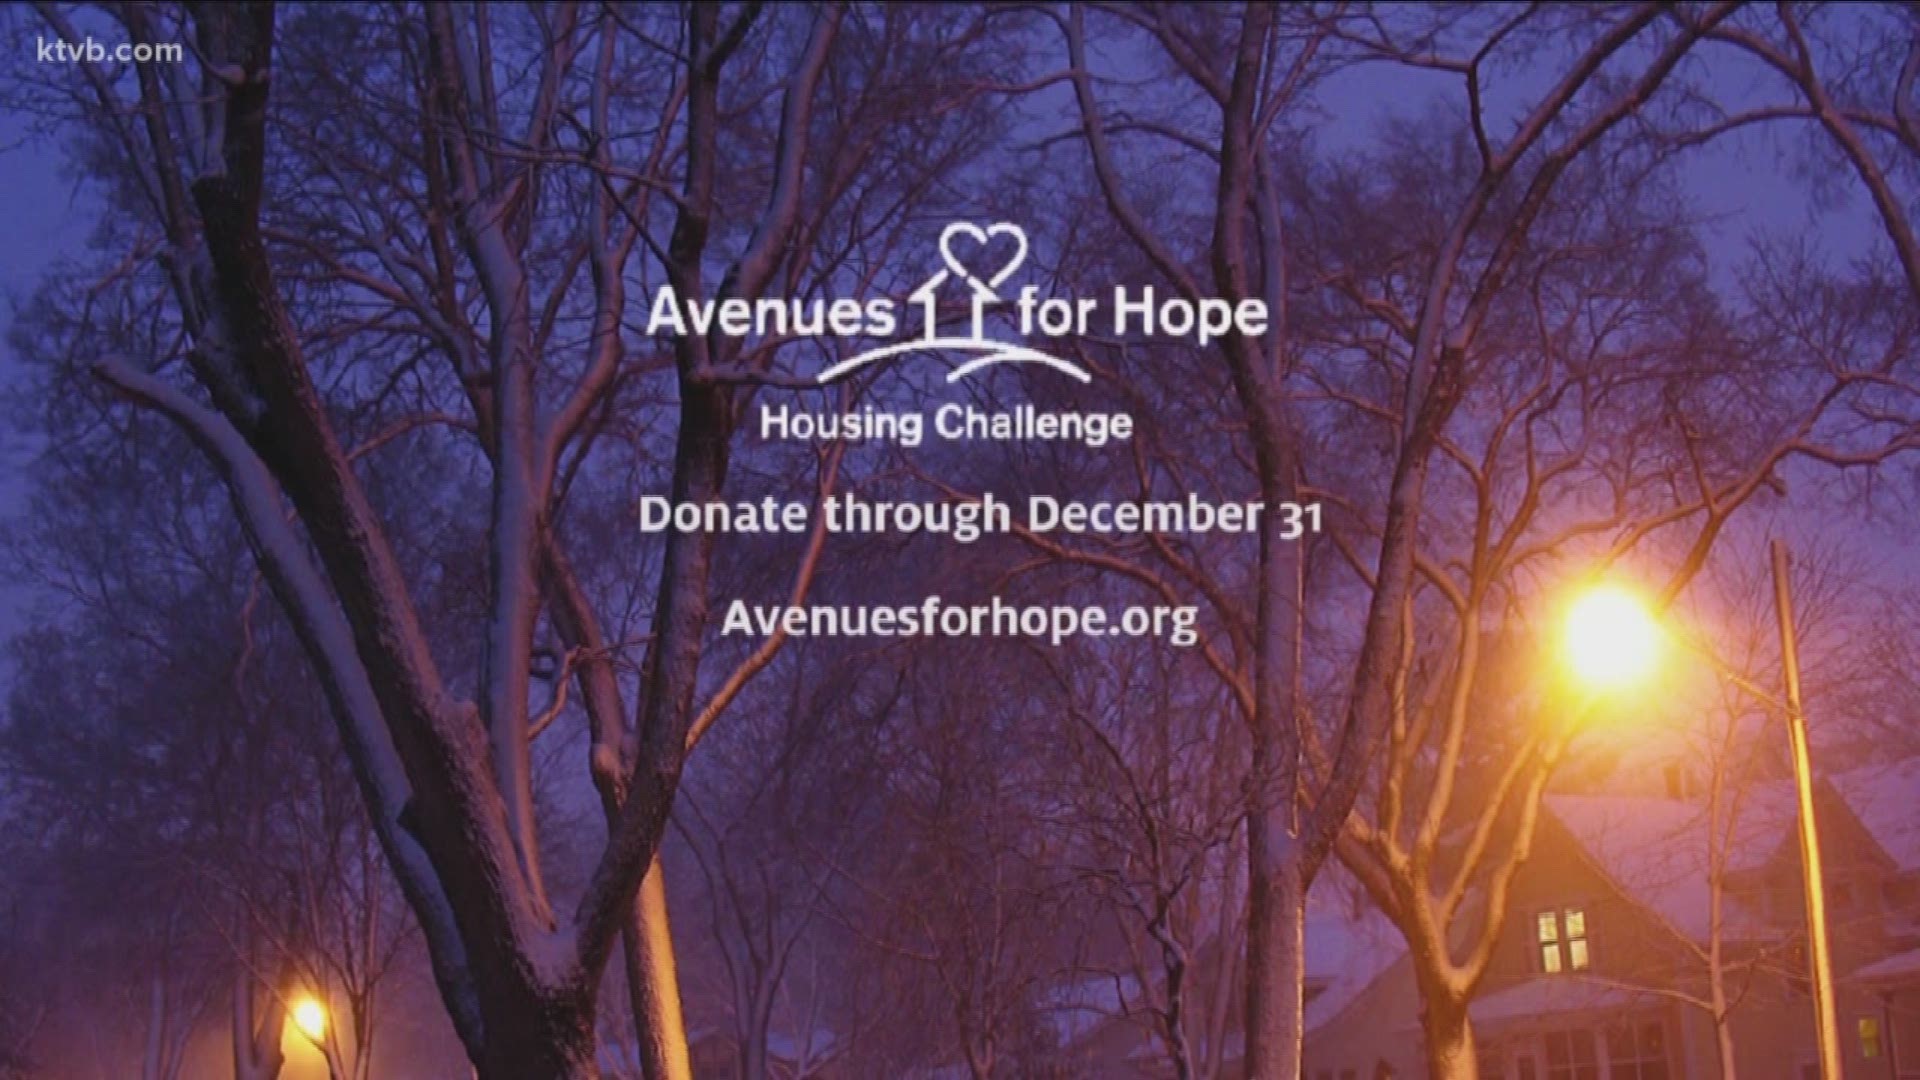 One of the largest fundraisers of the year for many housing-related nonprofits started on Wednesday, December 12, 2018. And thanks to Avenues for Hope, more Idaho families will have warm, safe places to call home in the coming year.